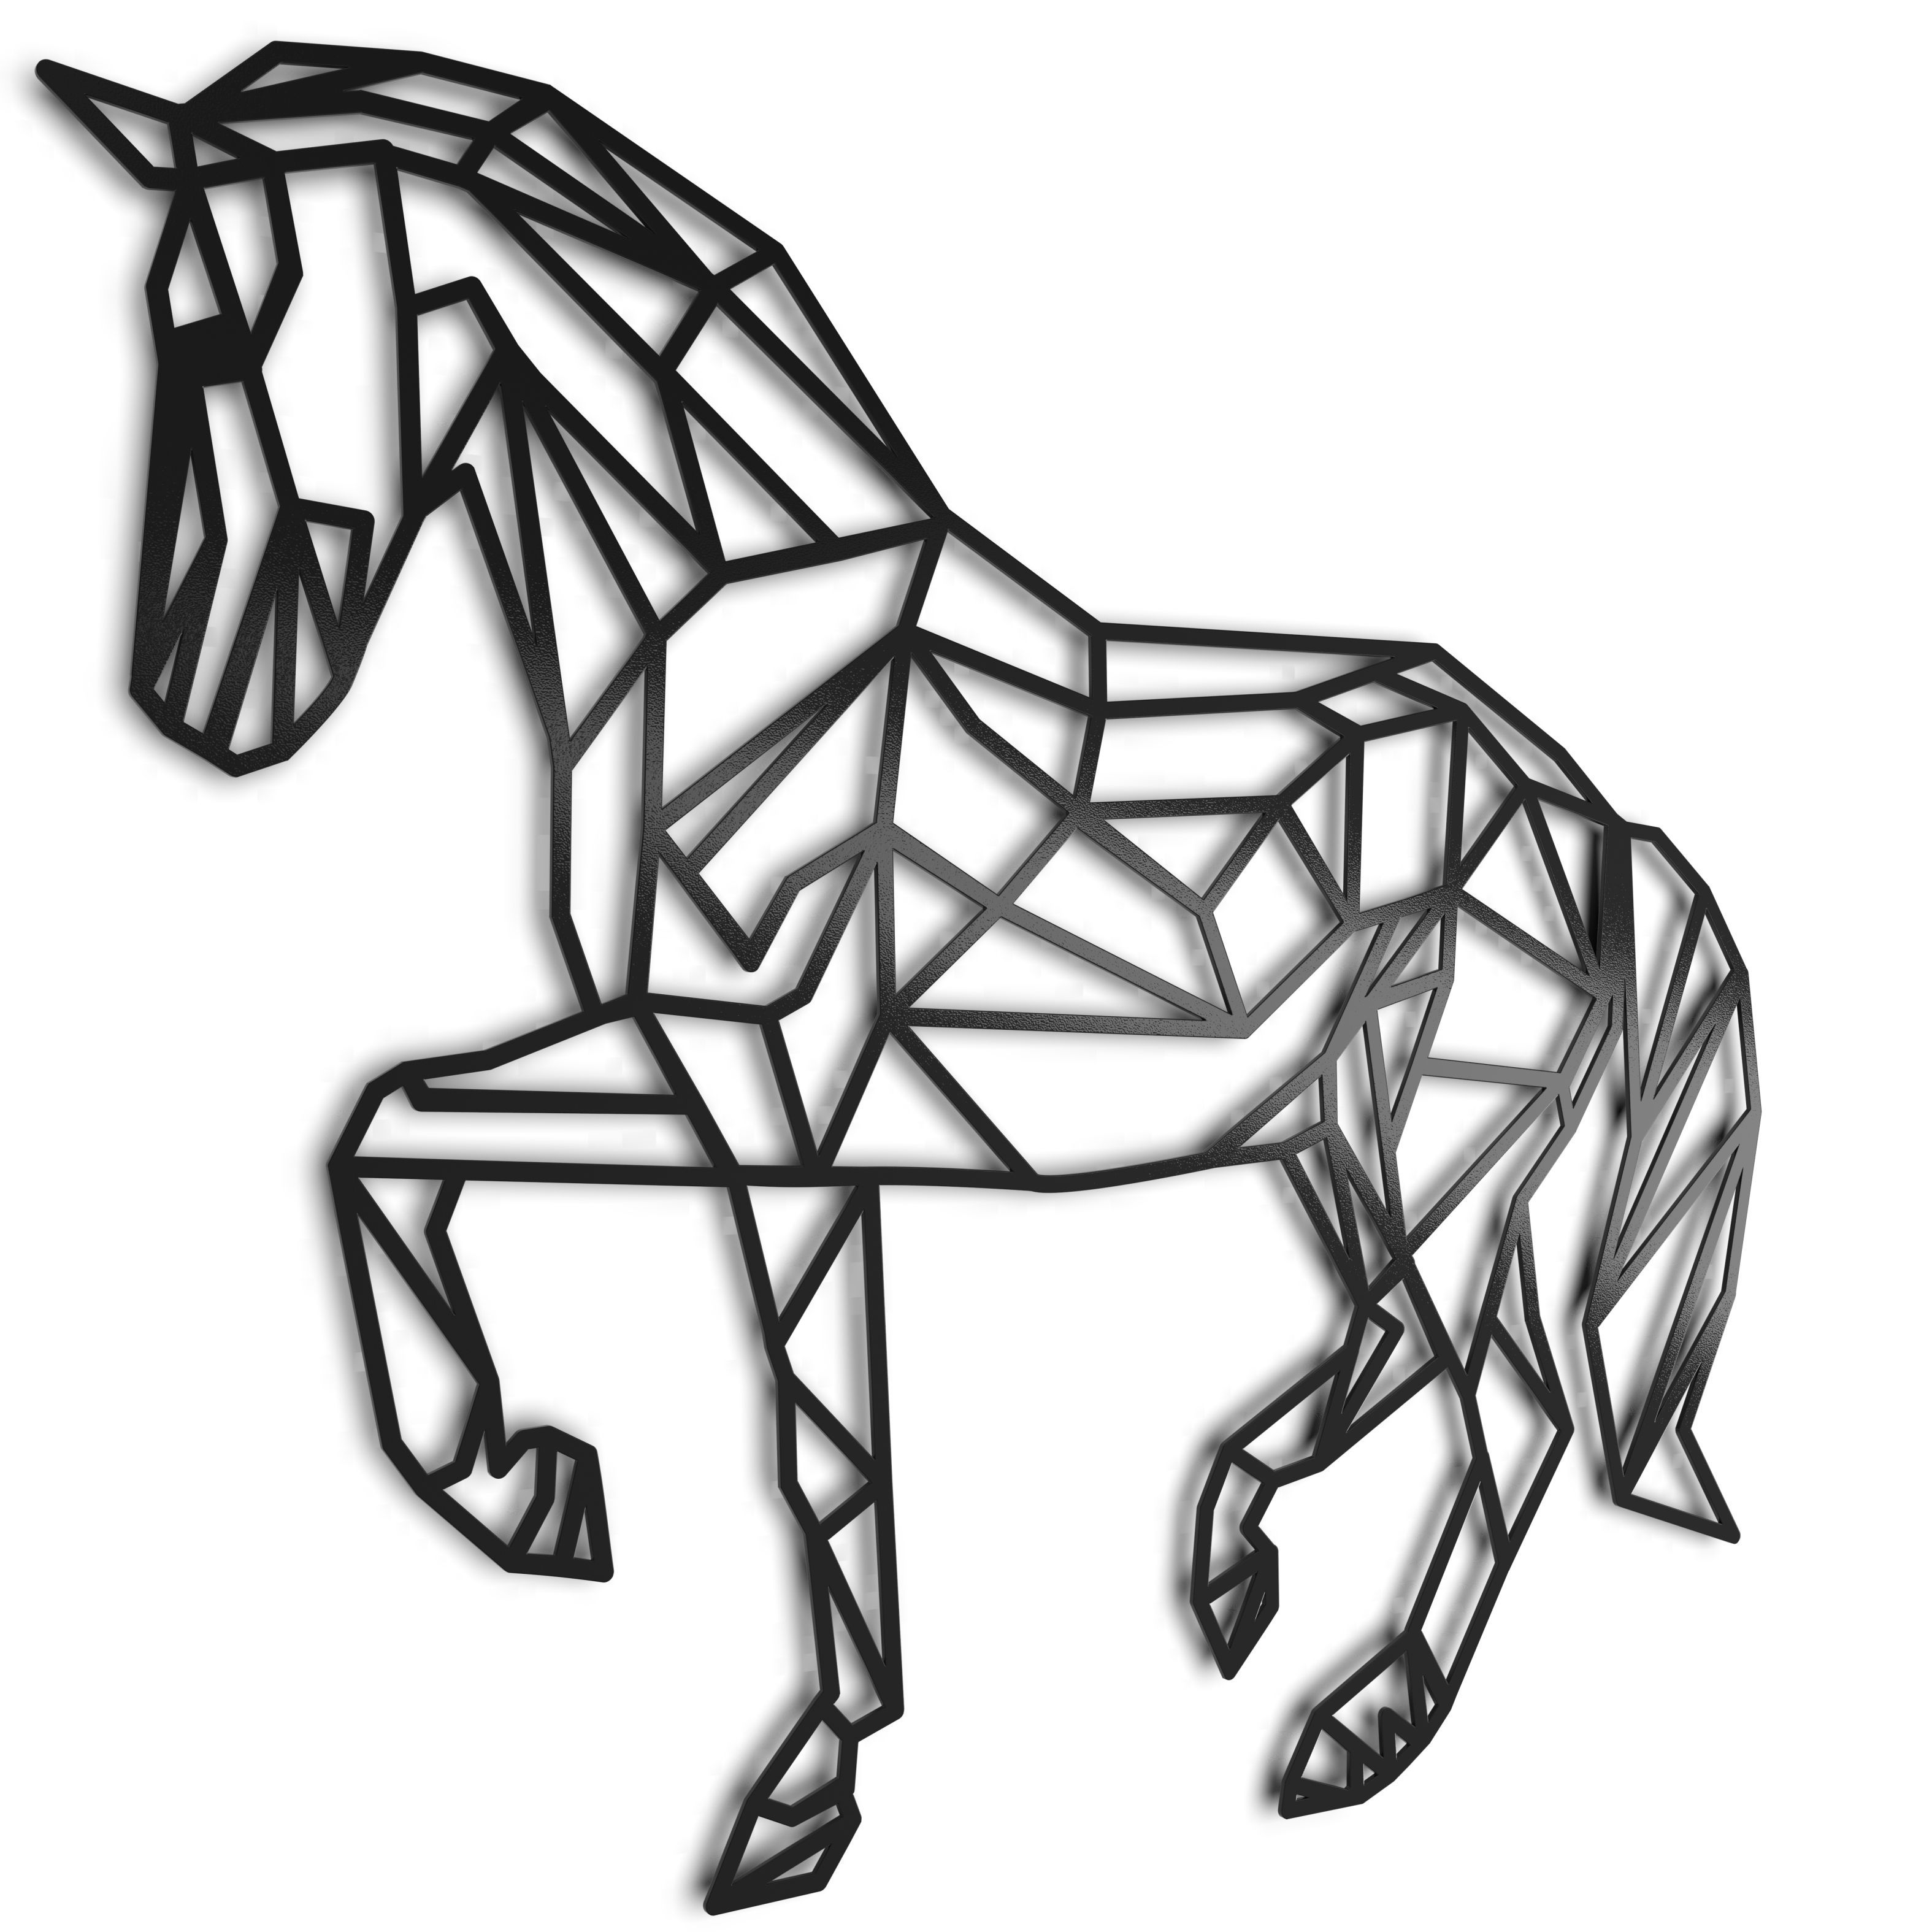 Geometric Horse Metal Wall Art Home Décor - 61x52cm By Unexpected Worx